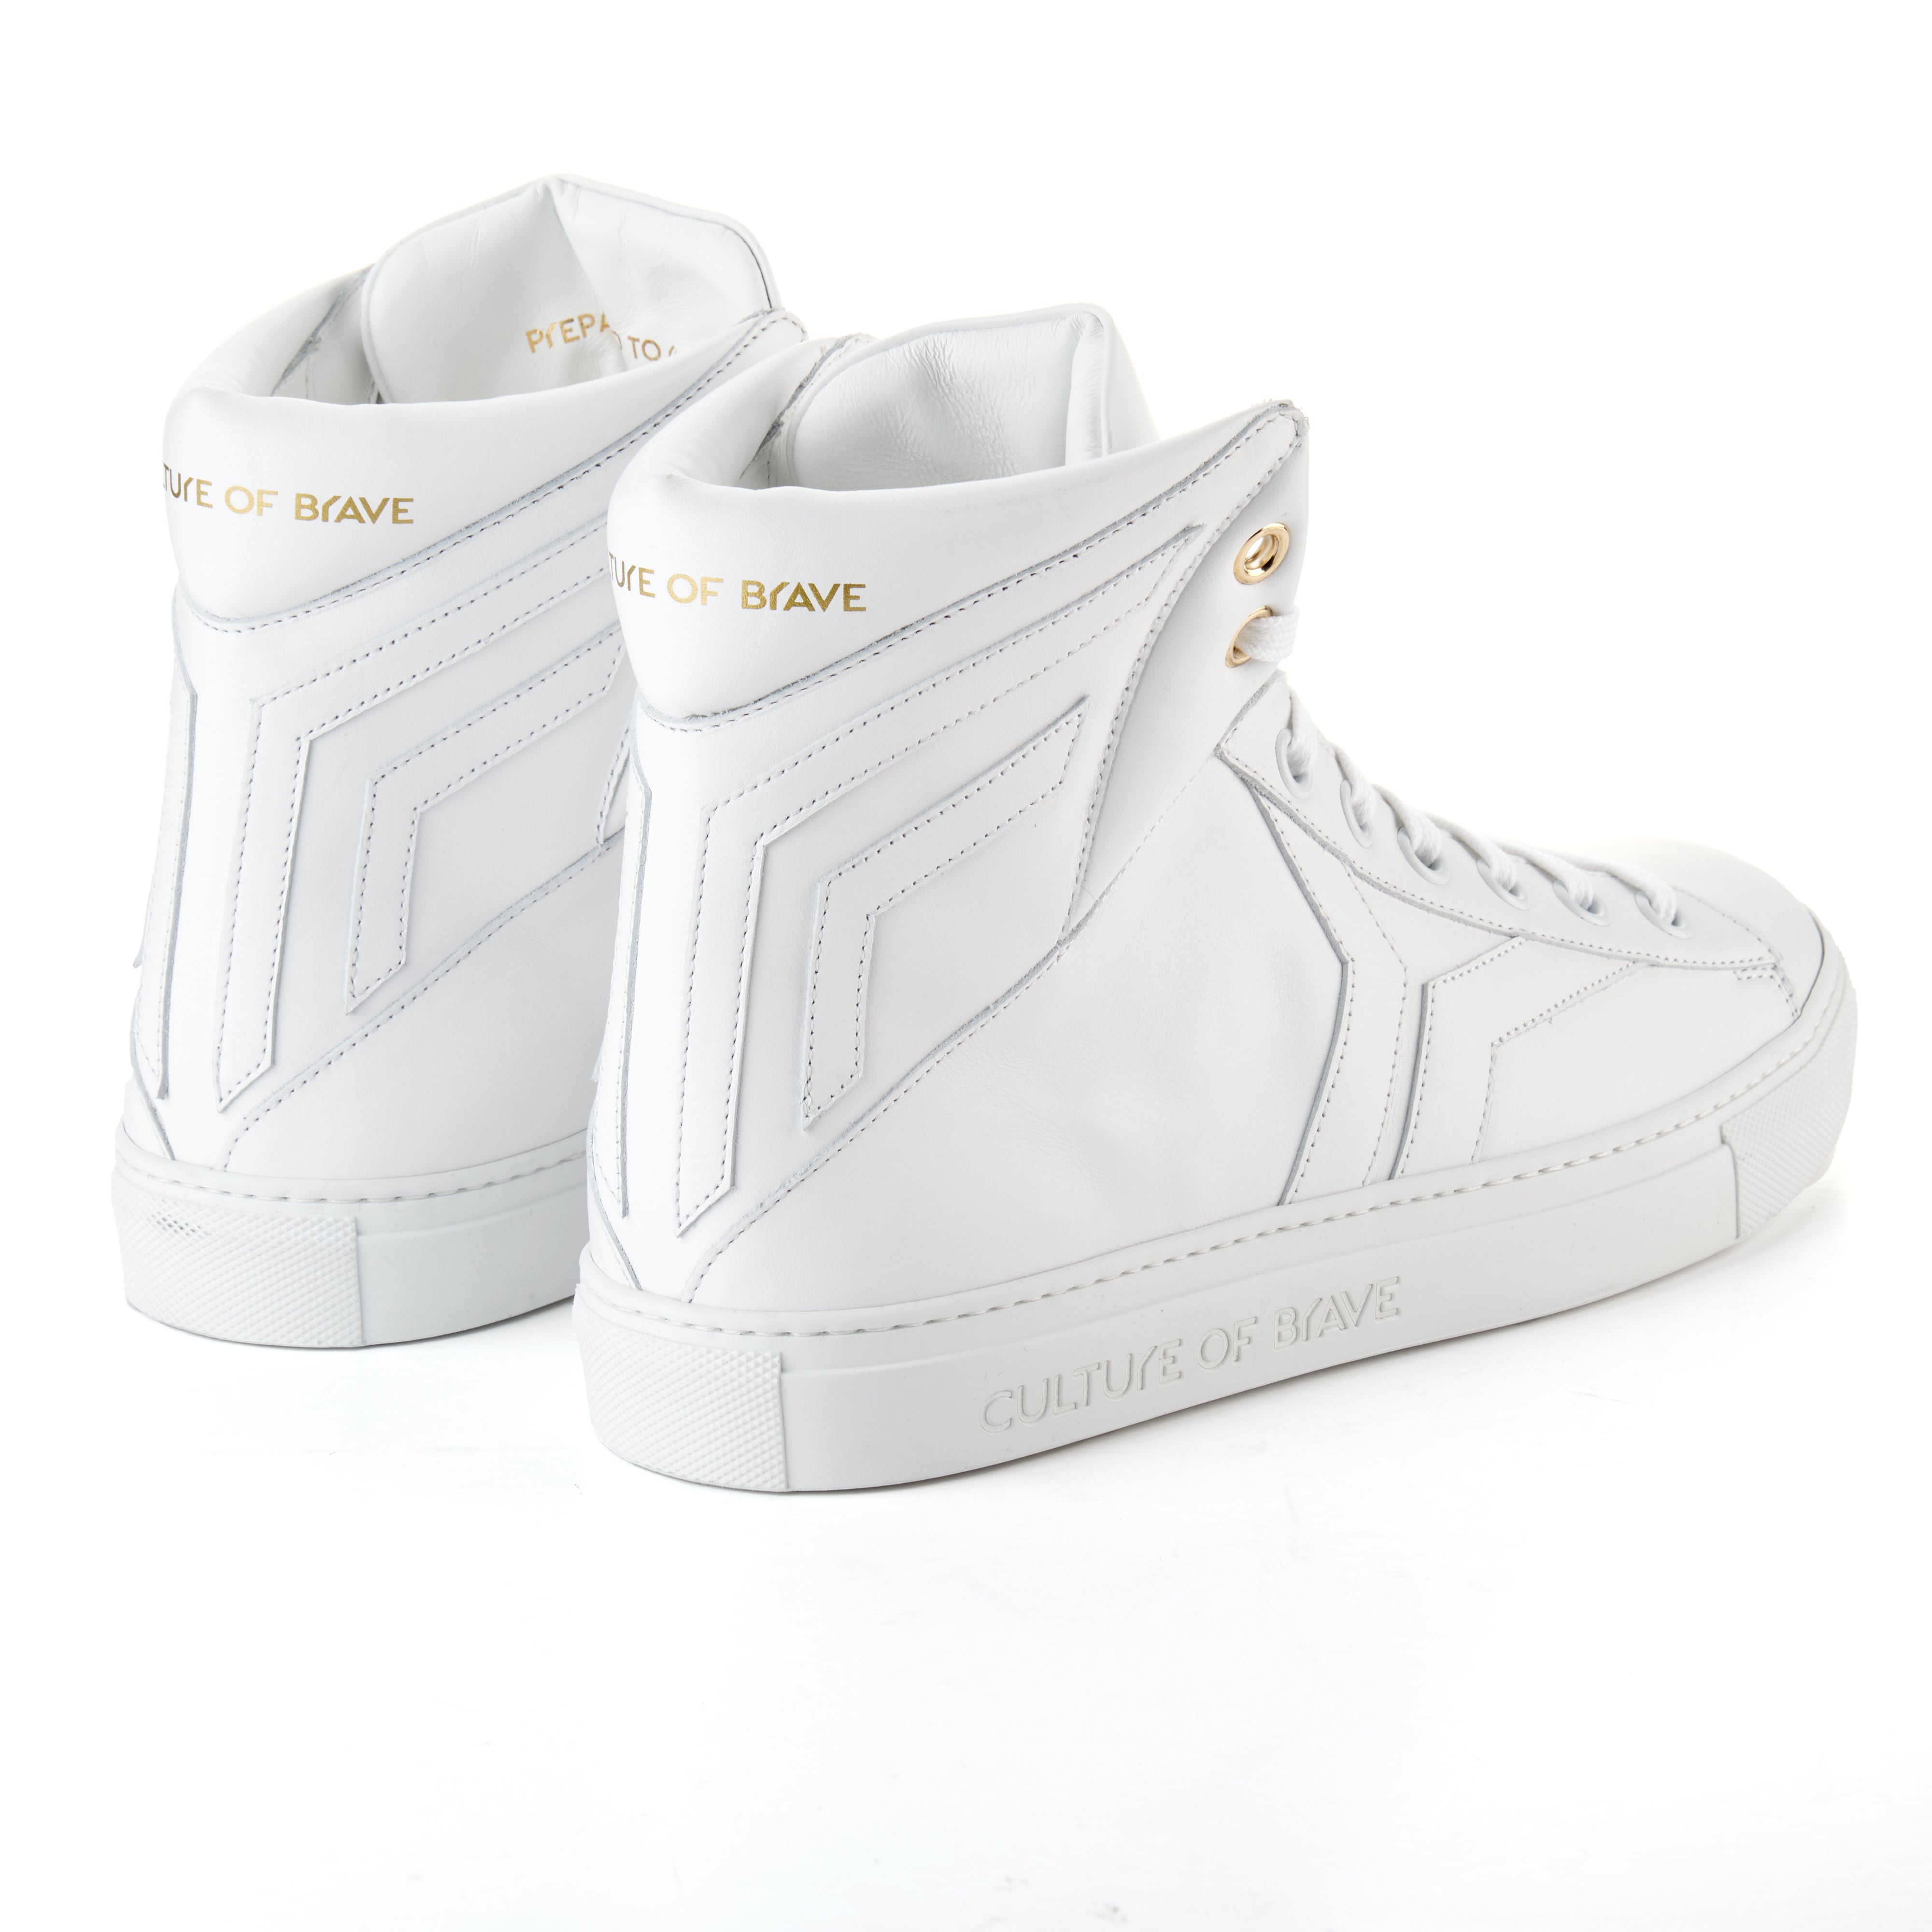 Prepared to Risk S20 Women White leather white wing high cut